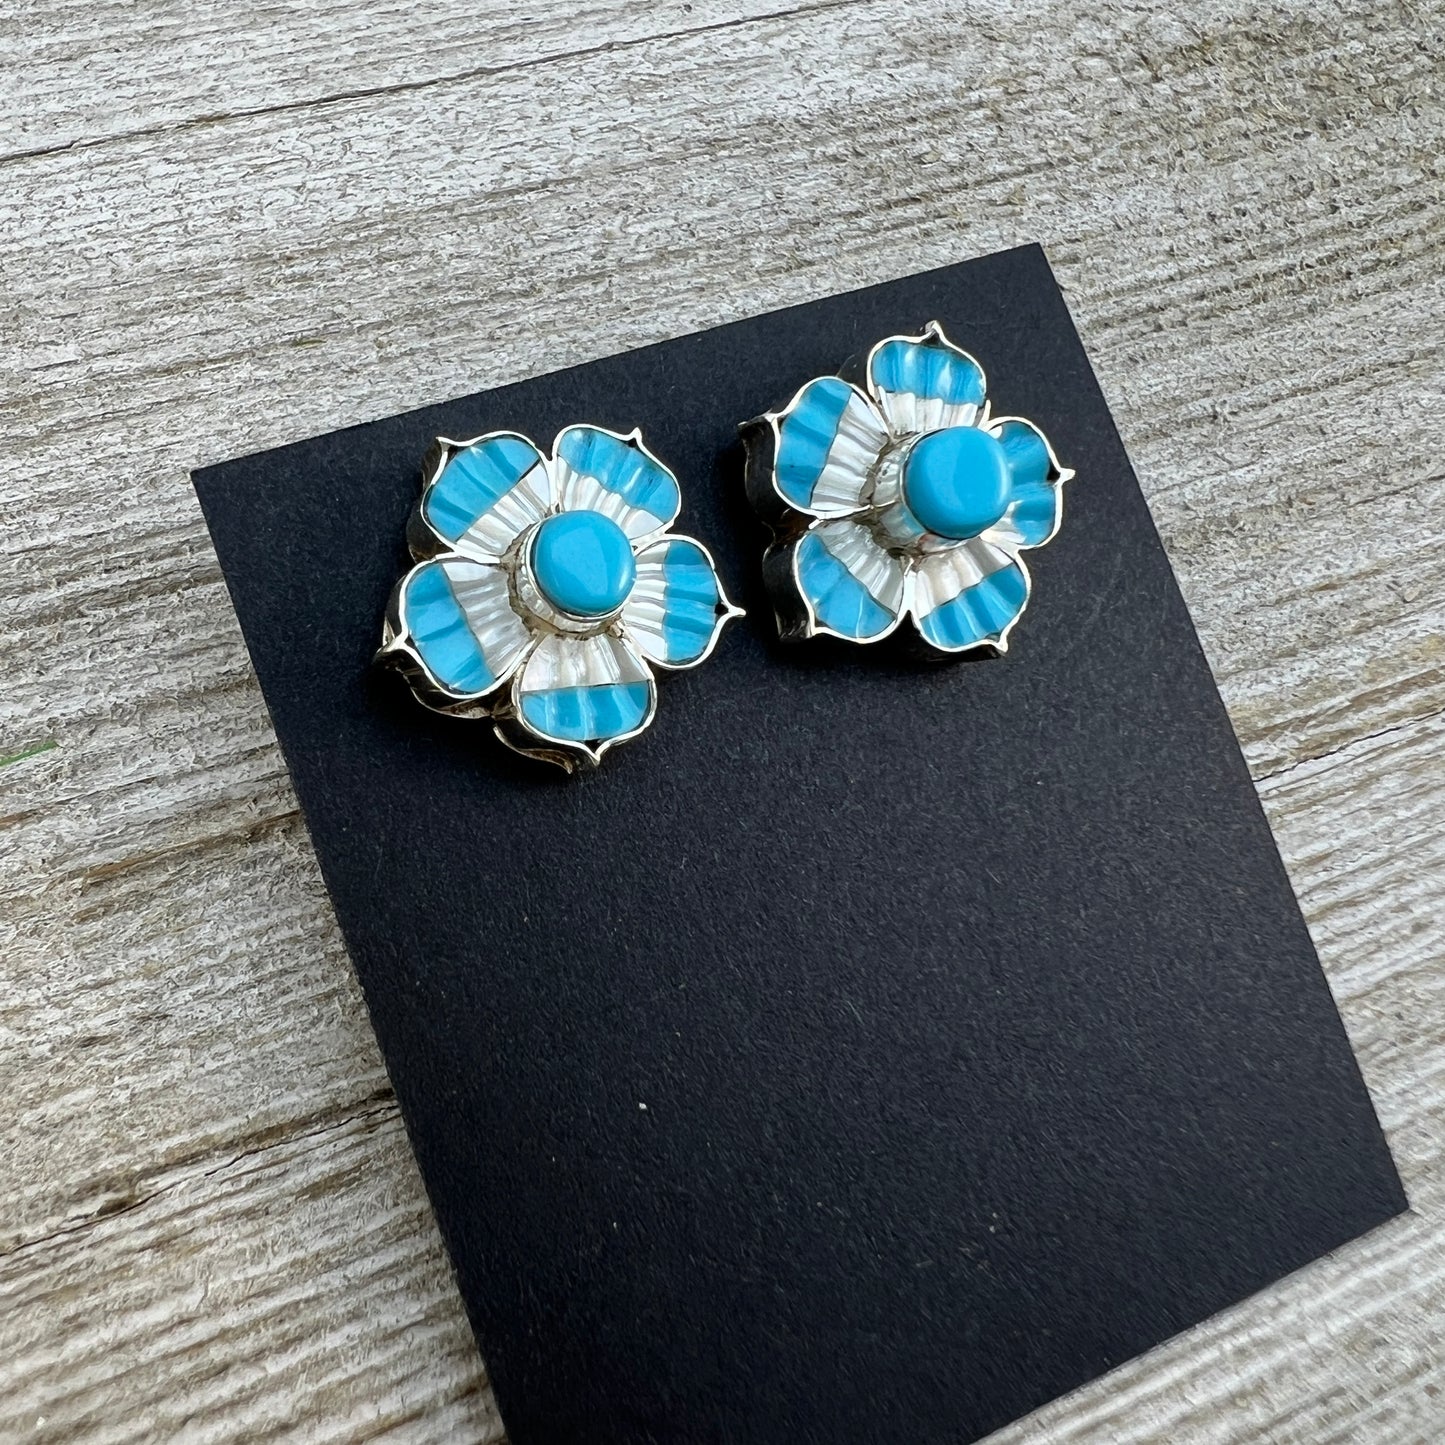 Small Zuni Carved Flower inlay Earrings, turquoise mother of pearl, Zuni handmade Marsha Quam